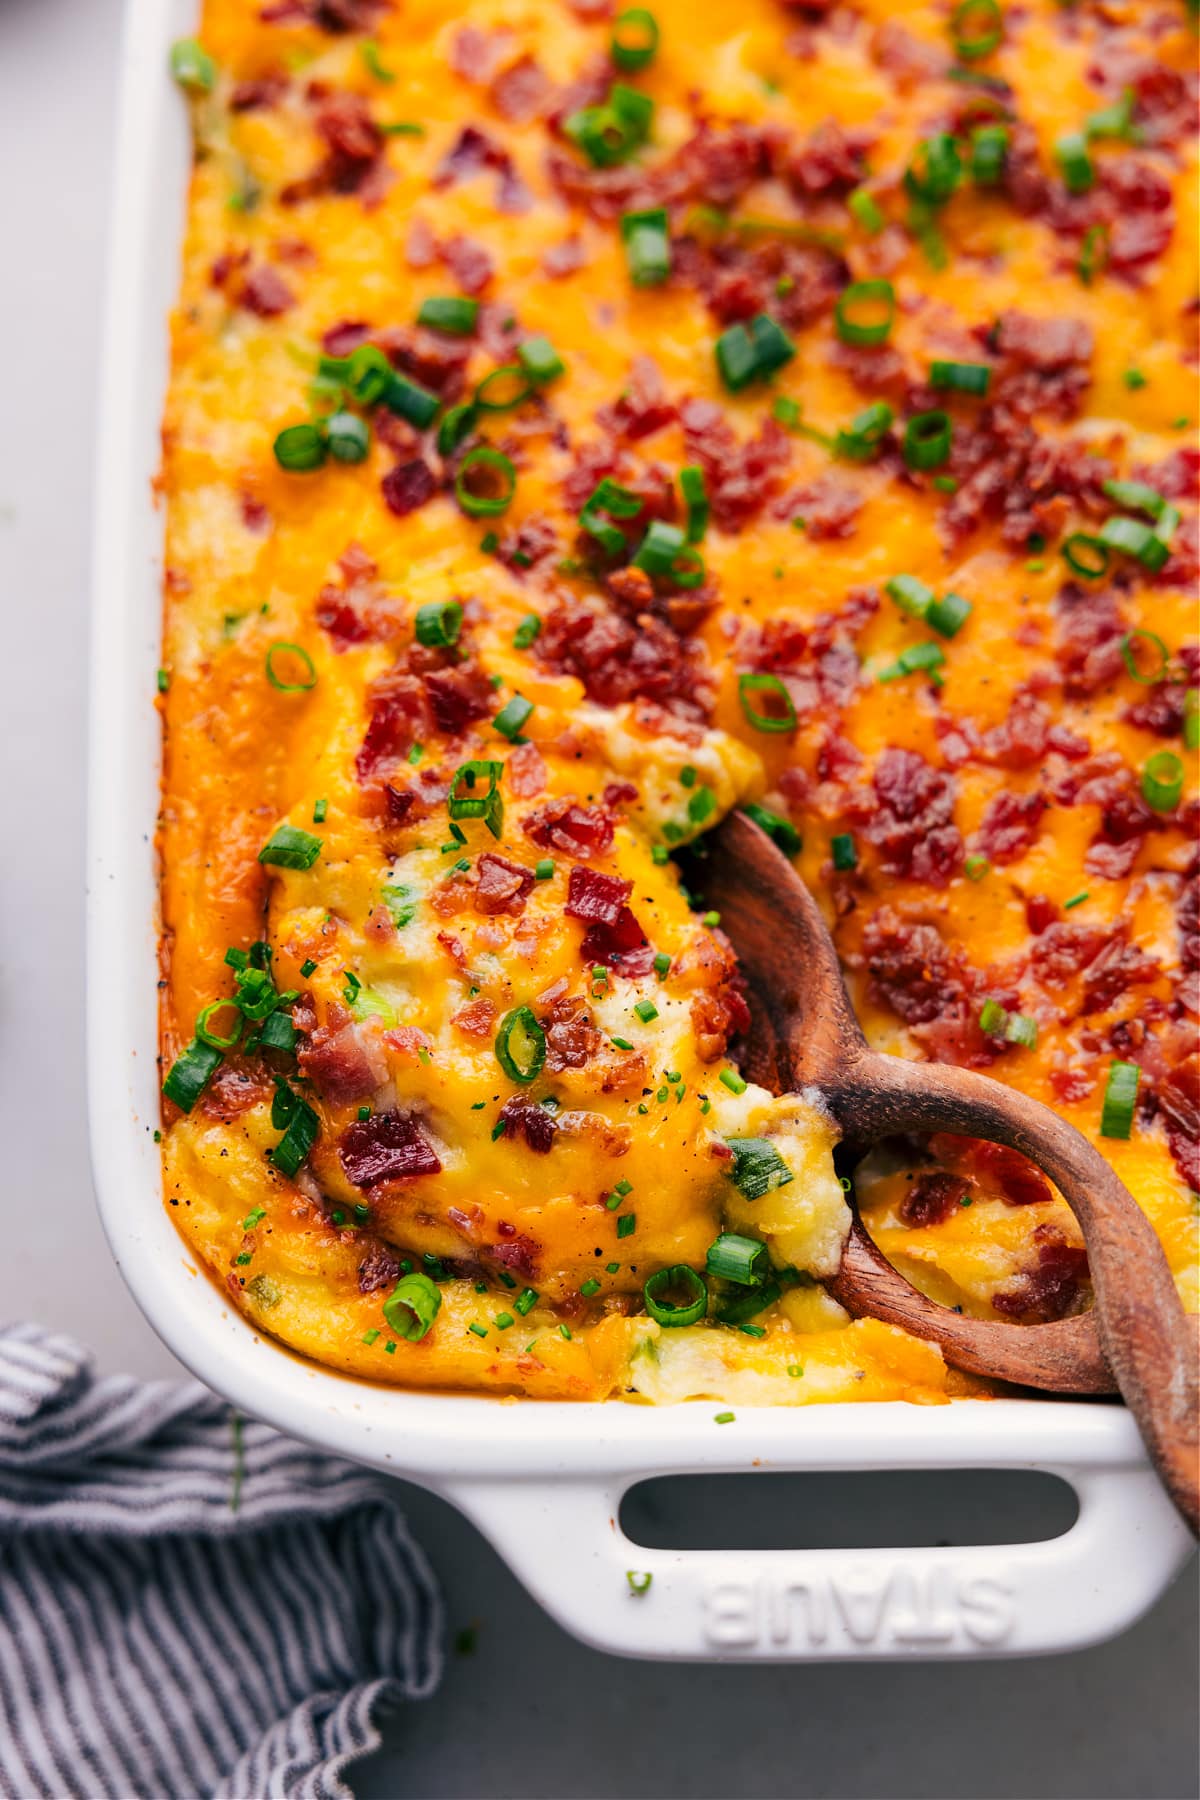 Mouthwatering Twice-Baked Potato Casserole in a casserole dish, ready to be enjoyed by someone.